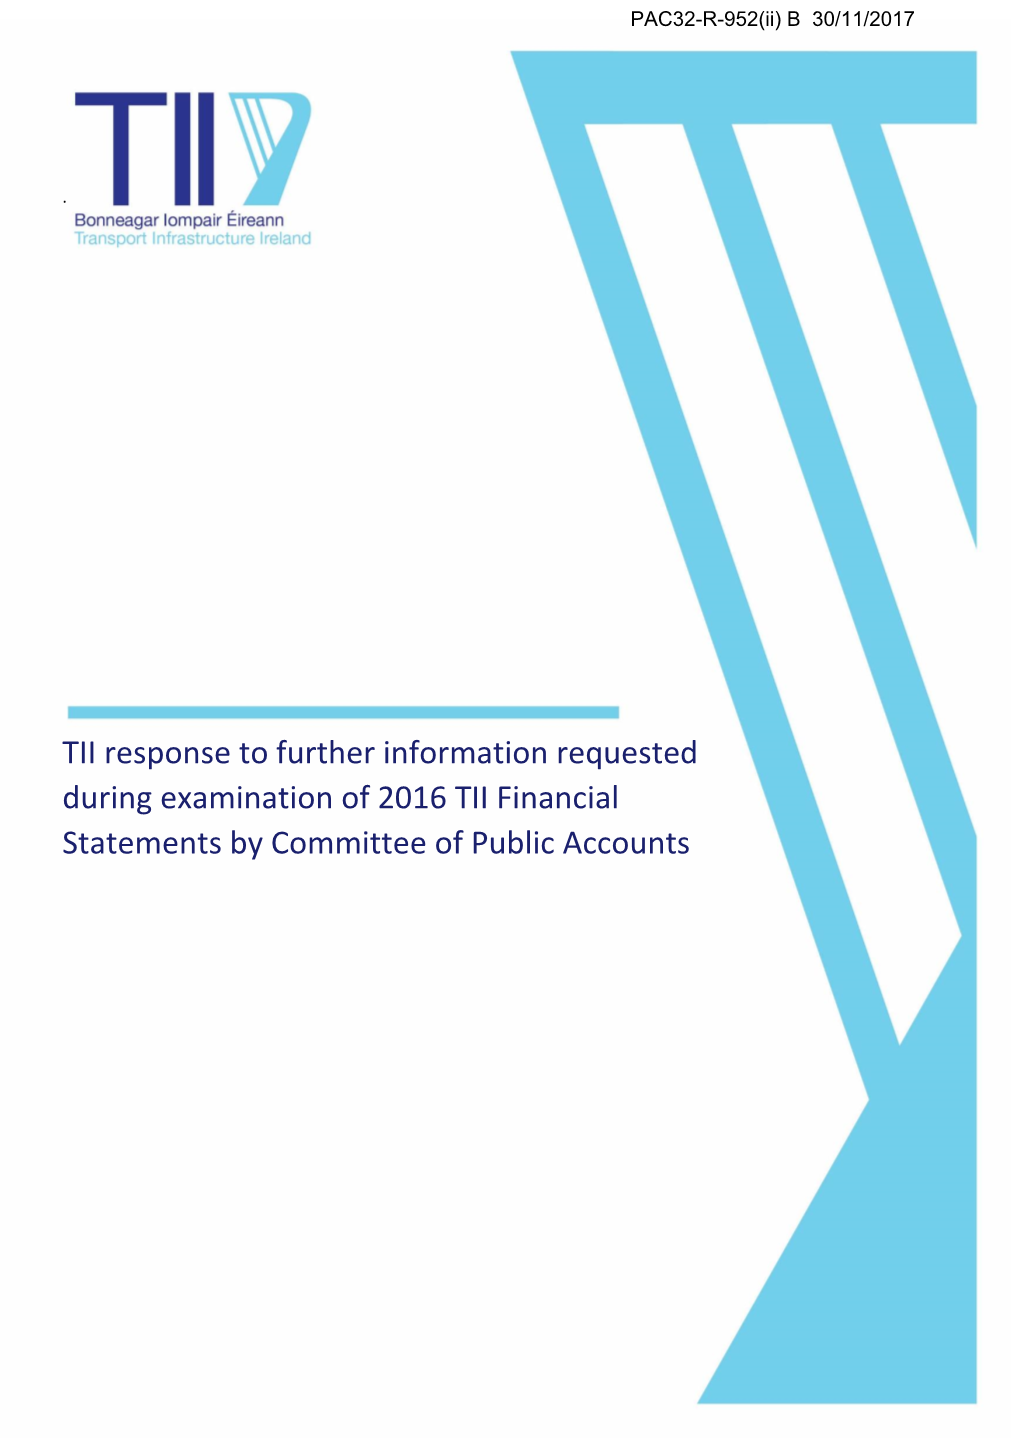 TII Response to Further Information Requested During Examination of 2016 TII Financial Statements by Committee of Public Accounts